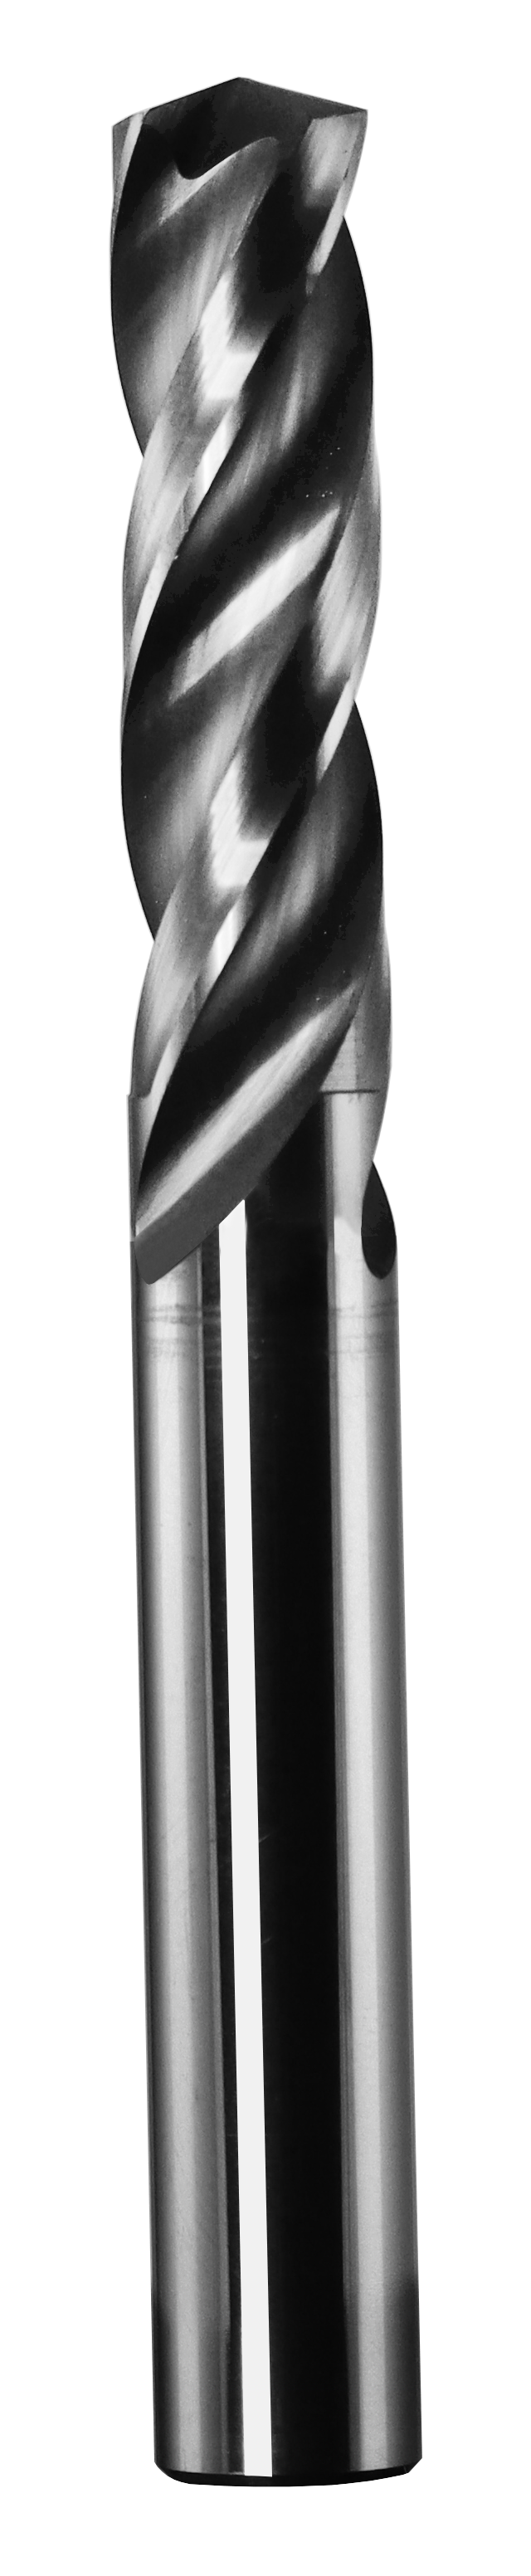 6.20mm Dia, 150 Degree Point, Solid Carbide Drill - 63011